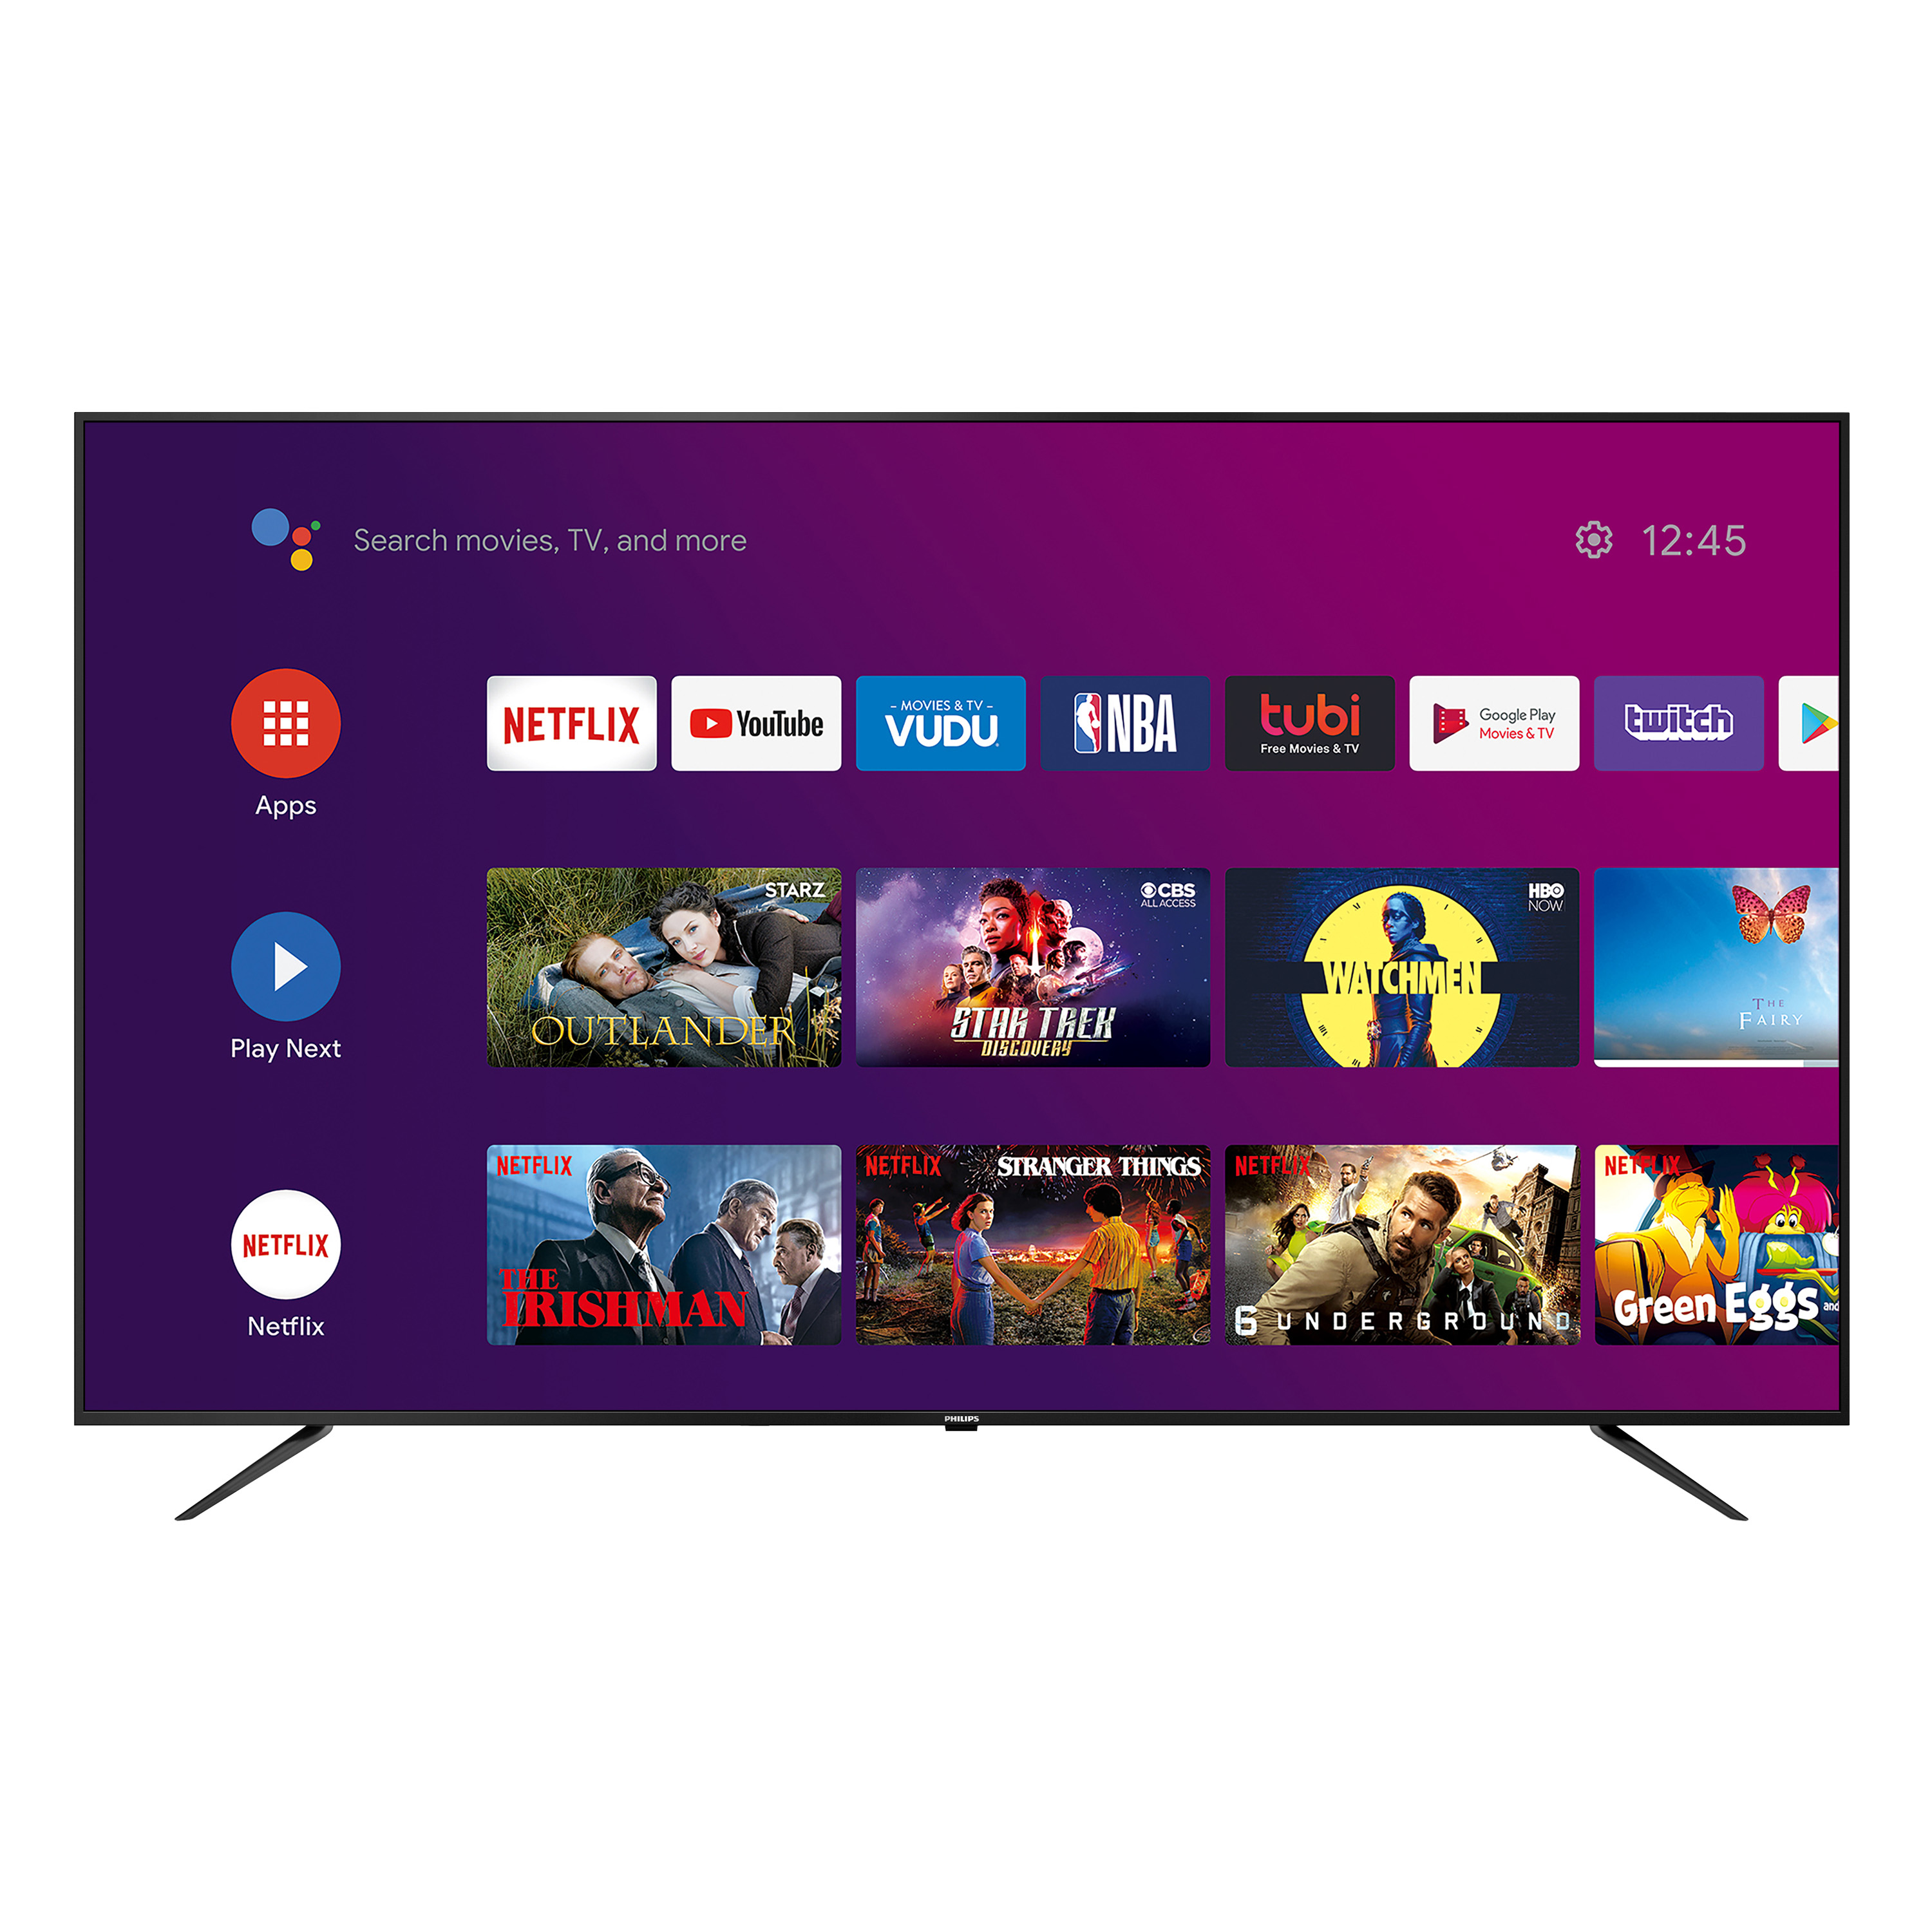 Philips 75" Smart Android Television $598($49.97 shipping) at Walmart